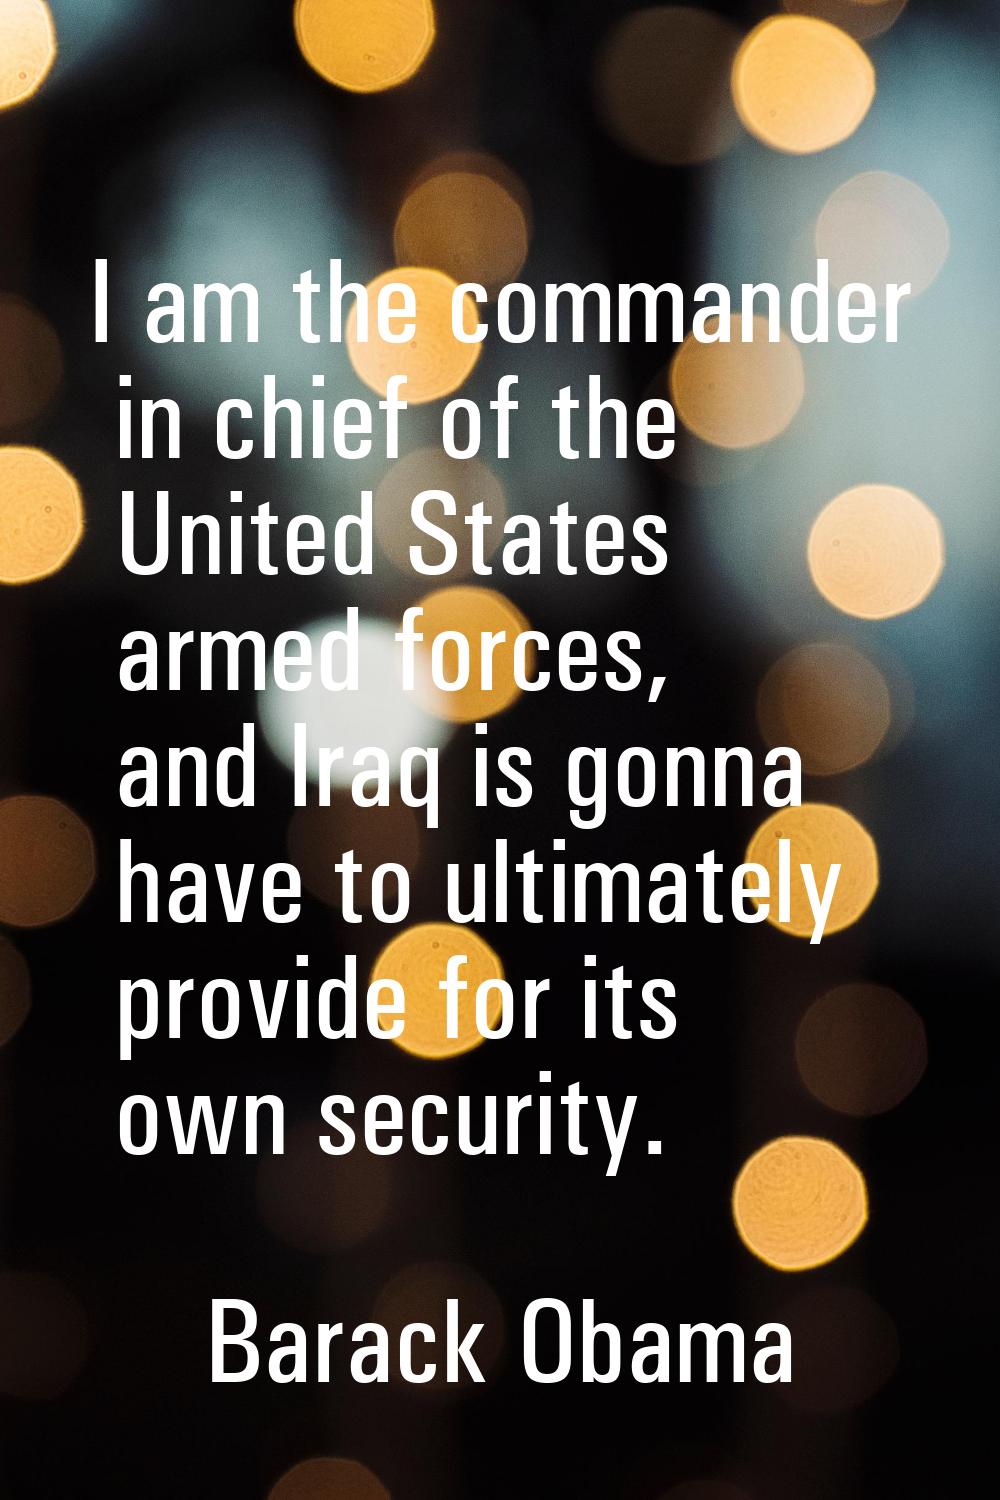 I am the commander in chief of the United States armed forces, and Iraq is gonna have to ultimately